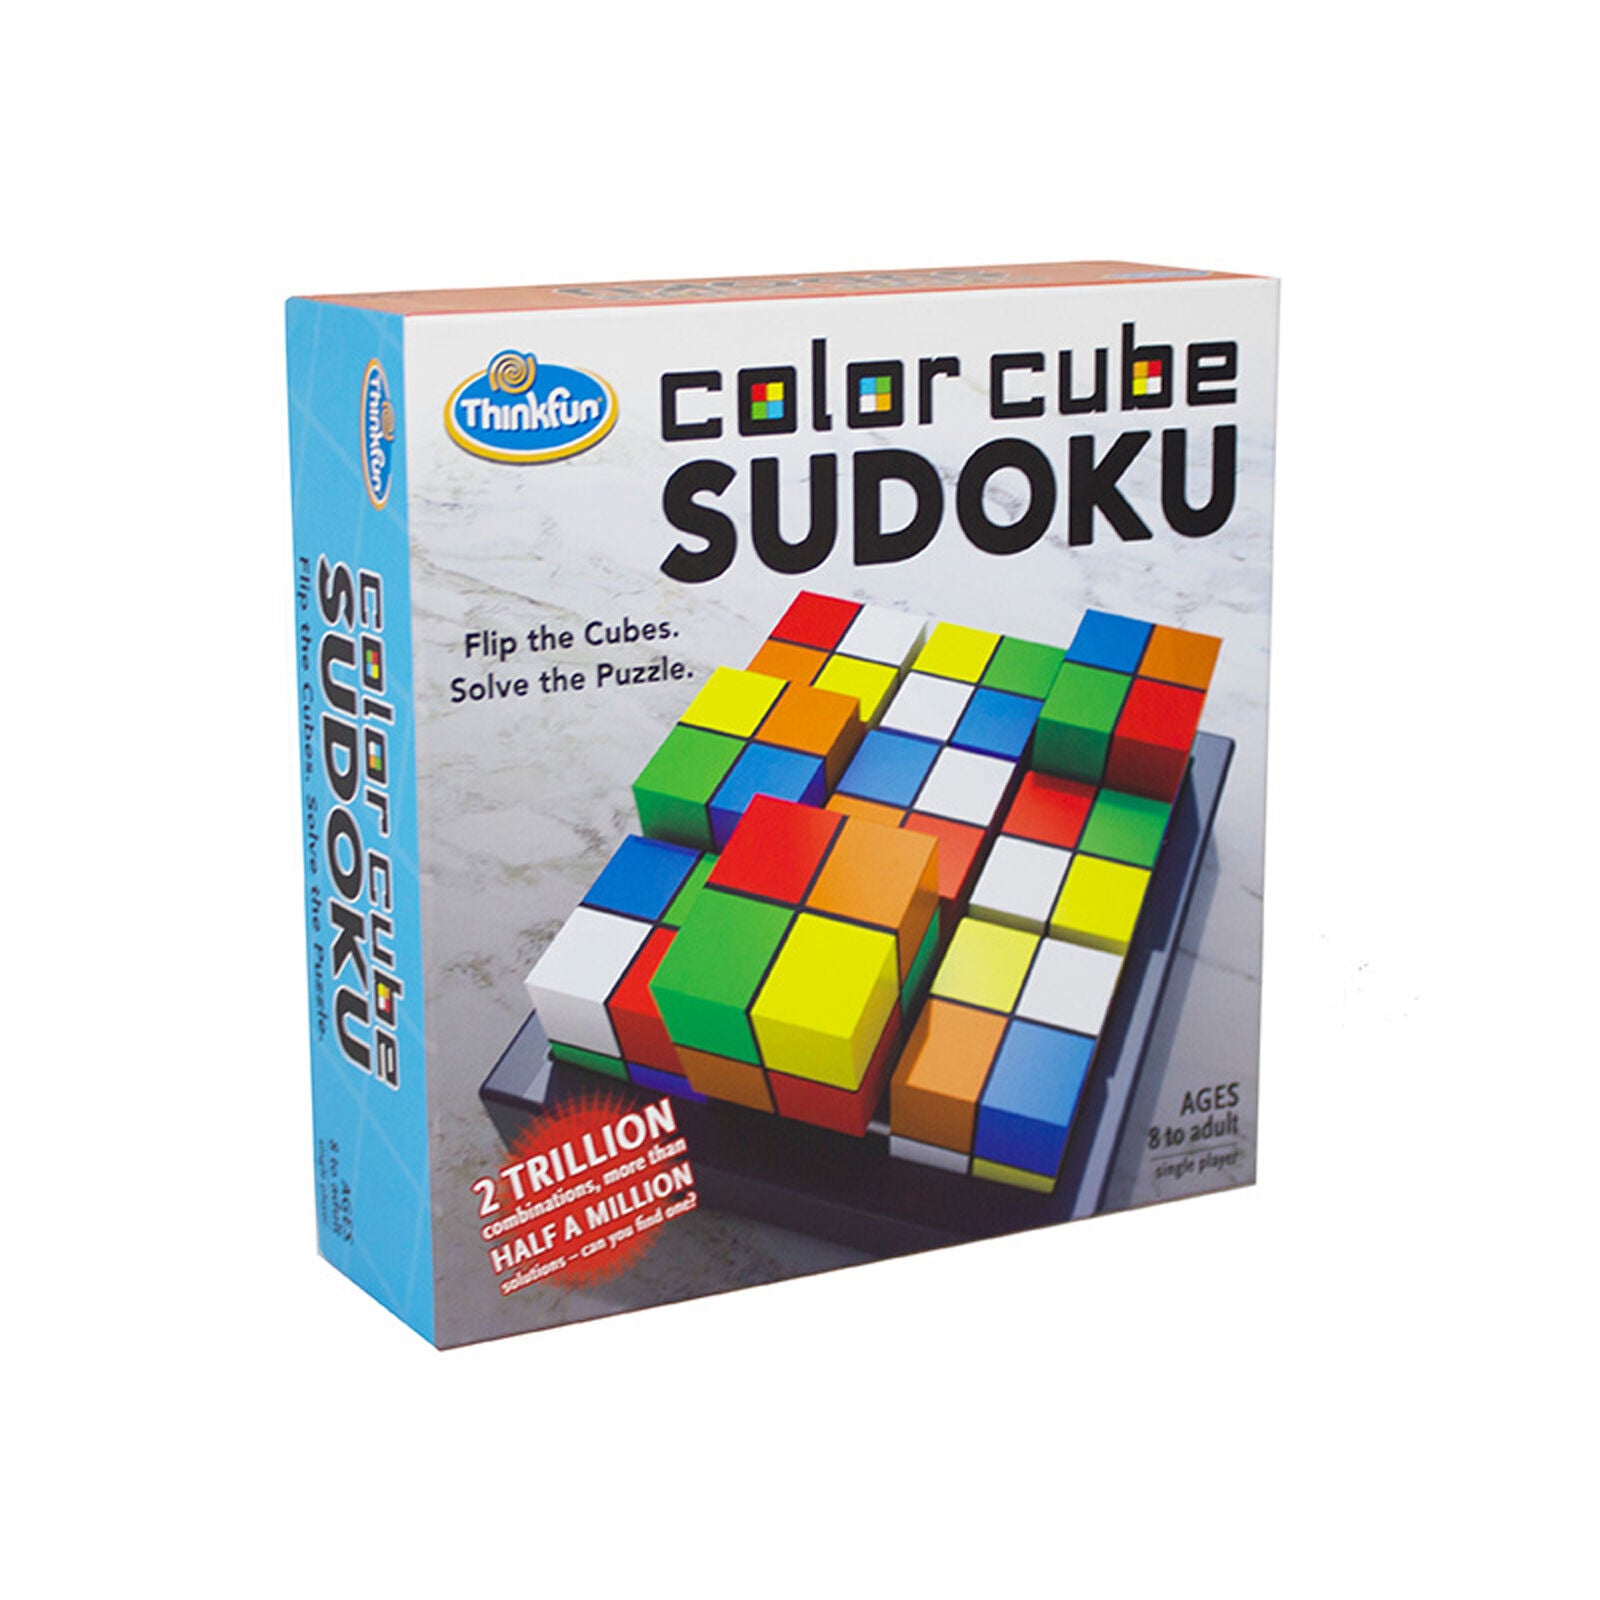 44001560 Ravensburger Color Cubes Sudoku Childrens Learning Games Age 6+ Years